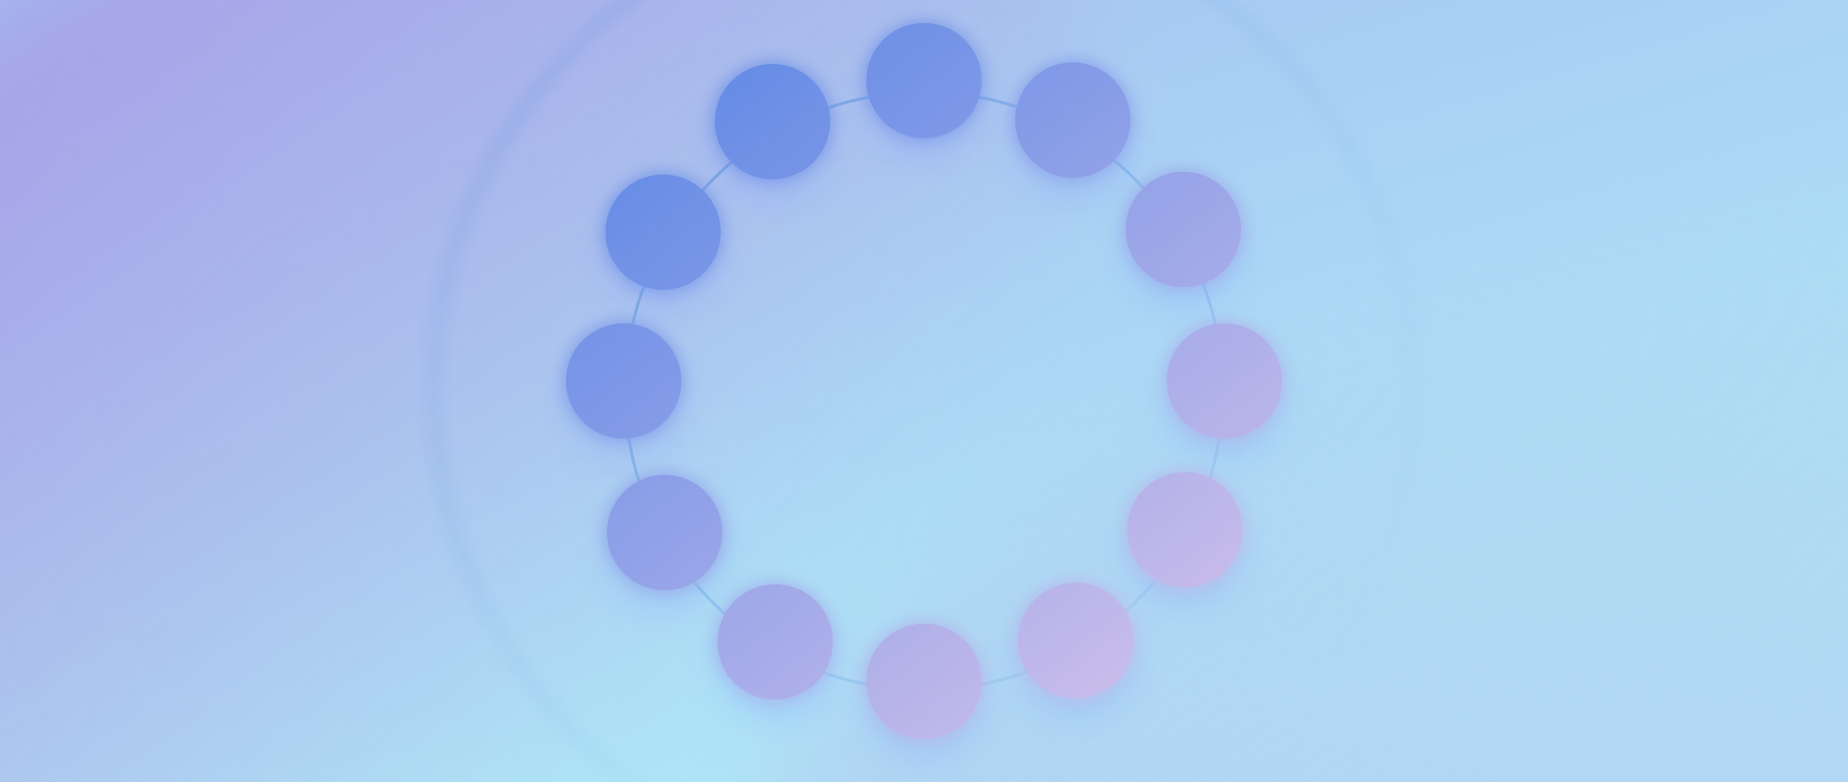 A circle of blue and purple circles on a light blue and purple background.